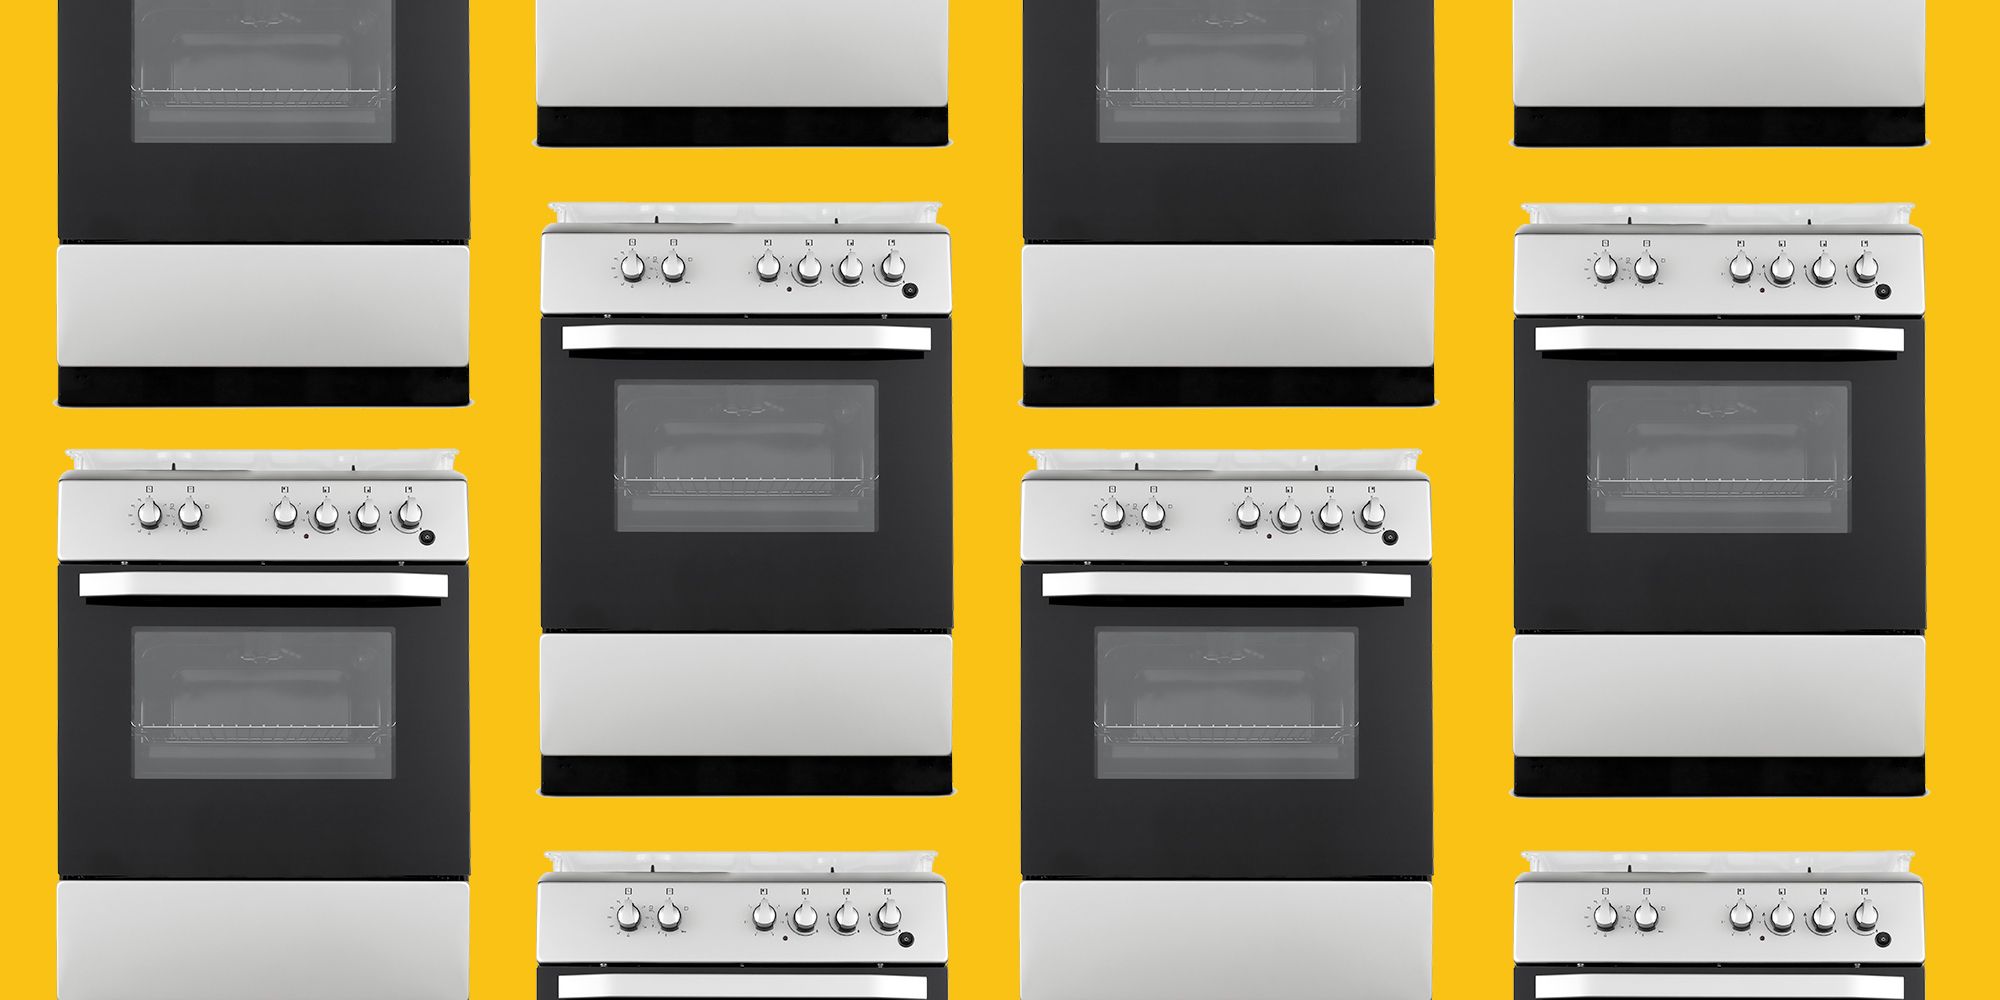 https://hips.hearstapps.com/hmg-prod/images/how-to-clean-oven-1588776504.jpg